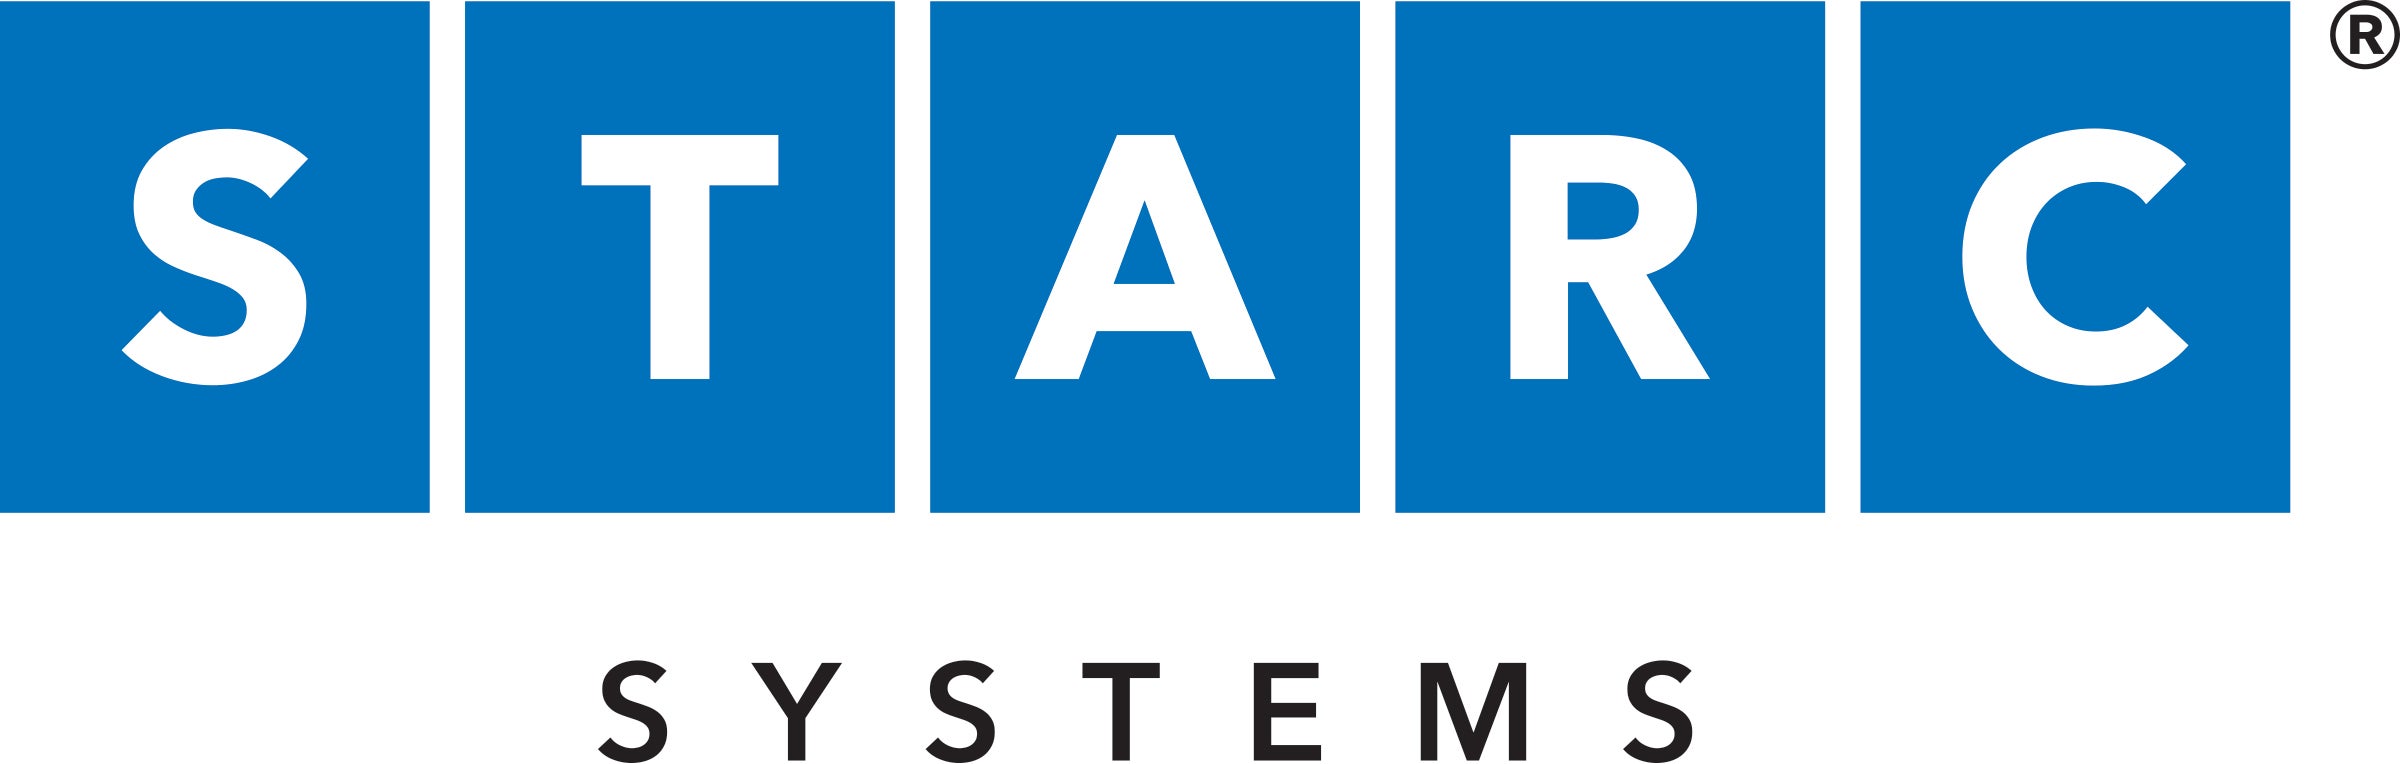 STARC Systems